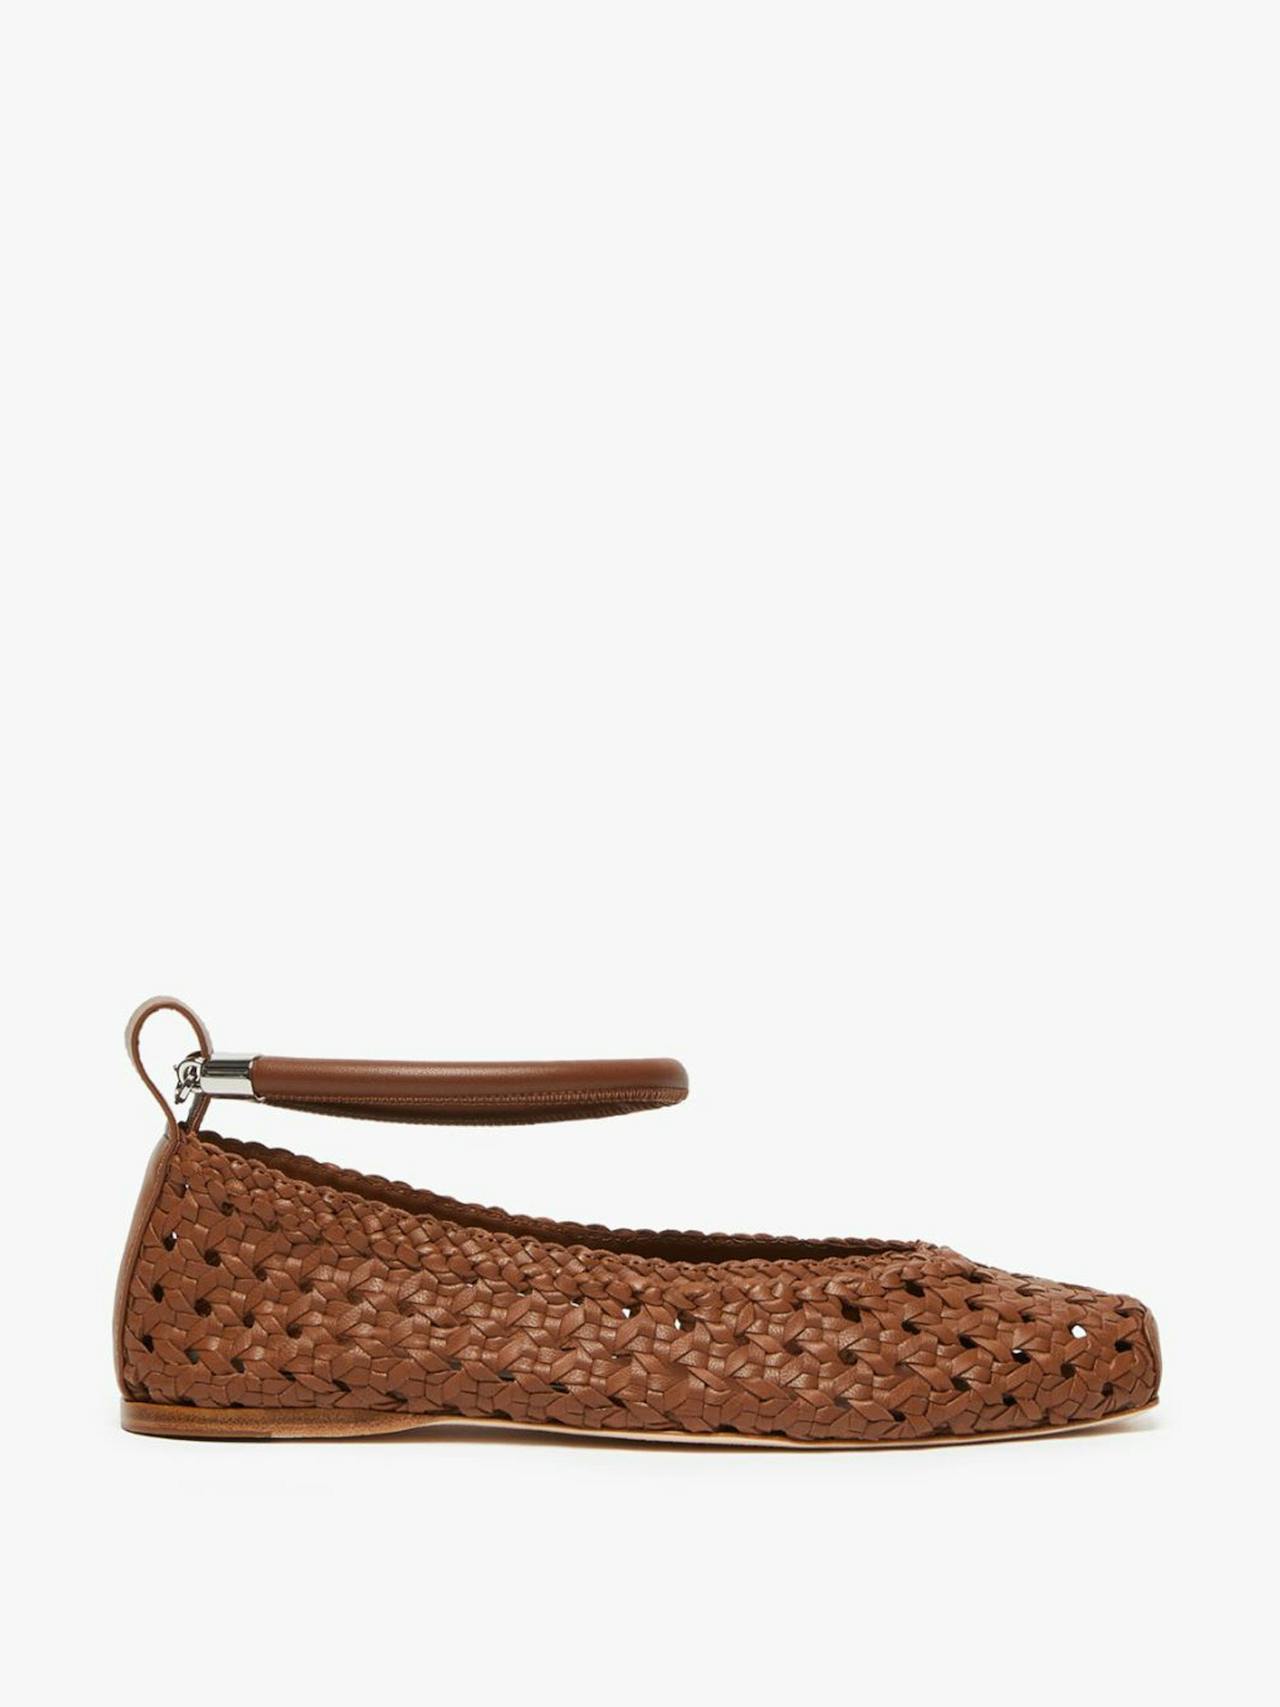 Woven nappa leather ballet flats